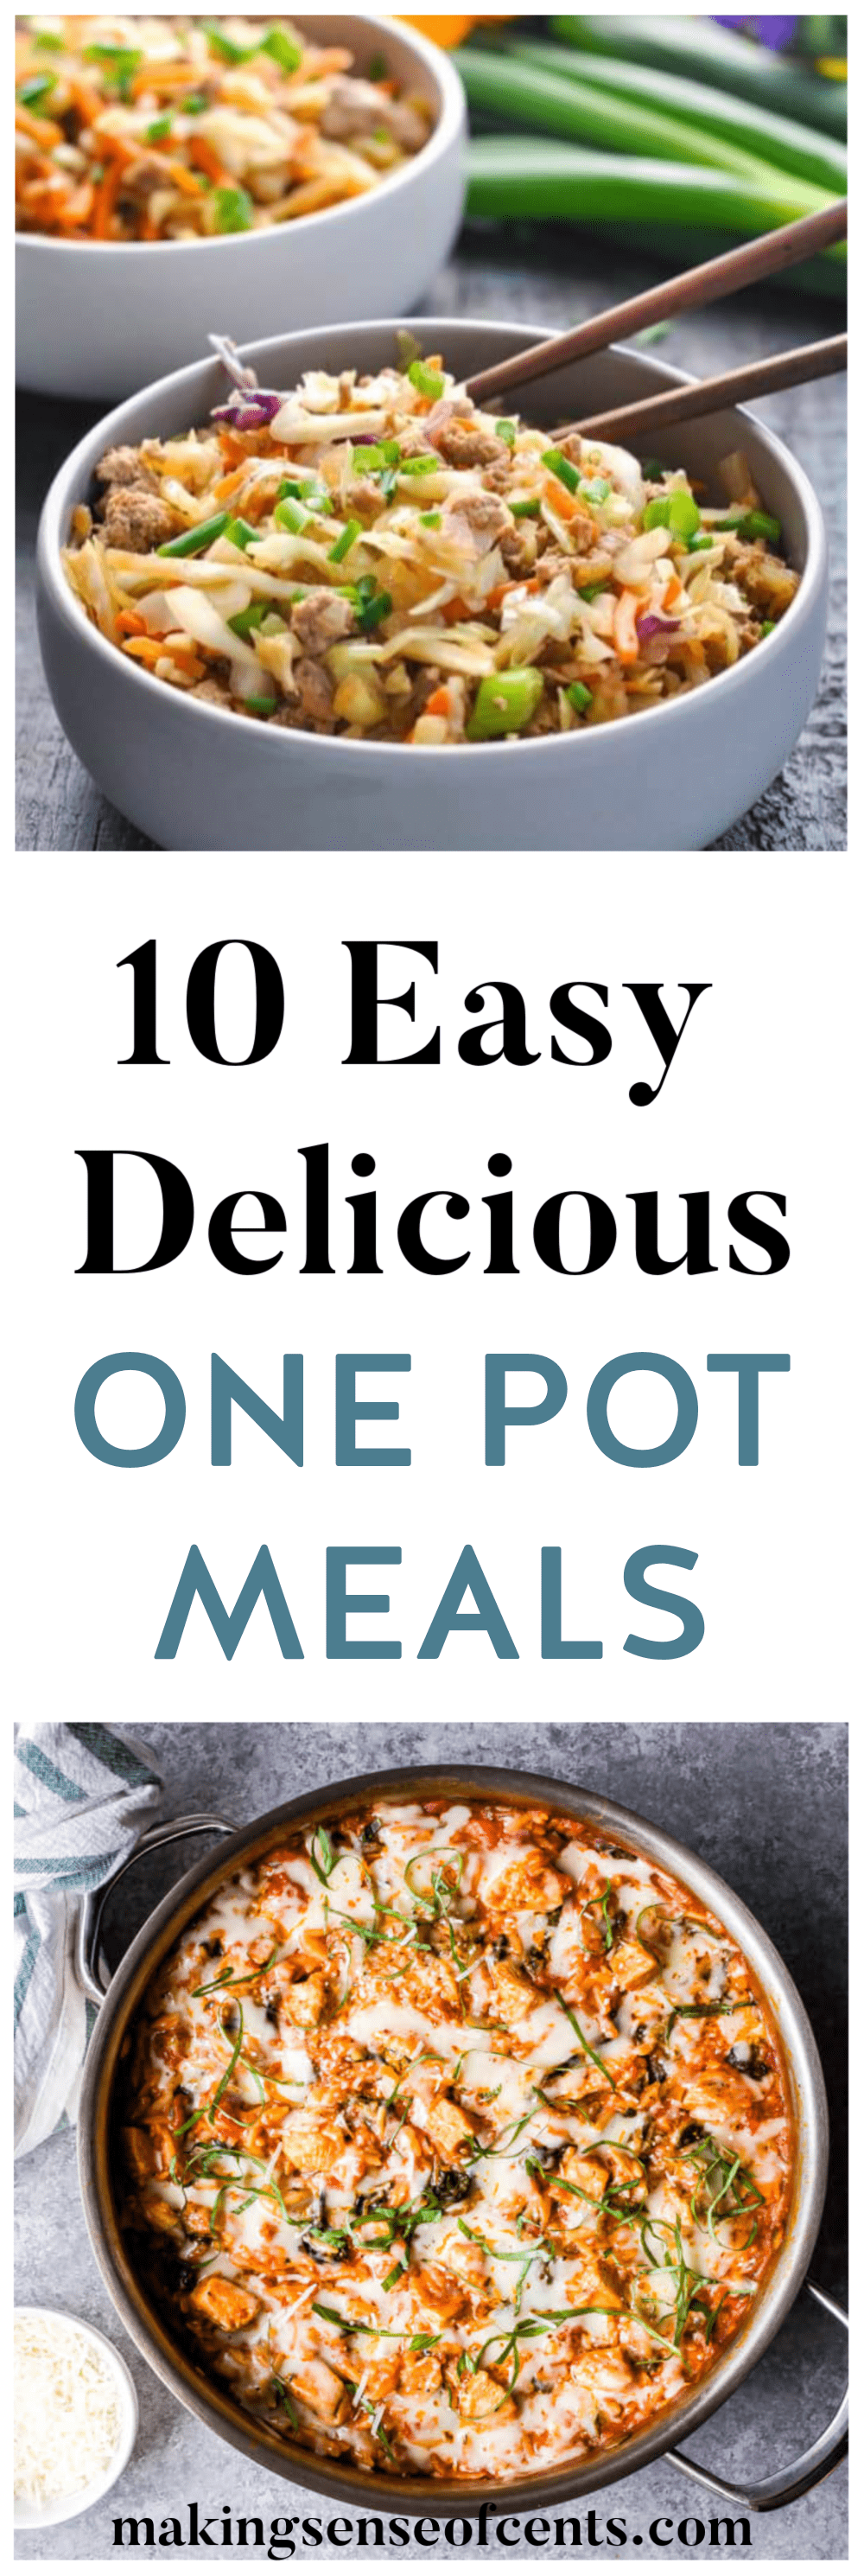 10 Quick and Easy One Pot Meals